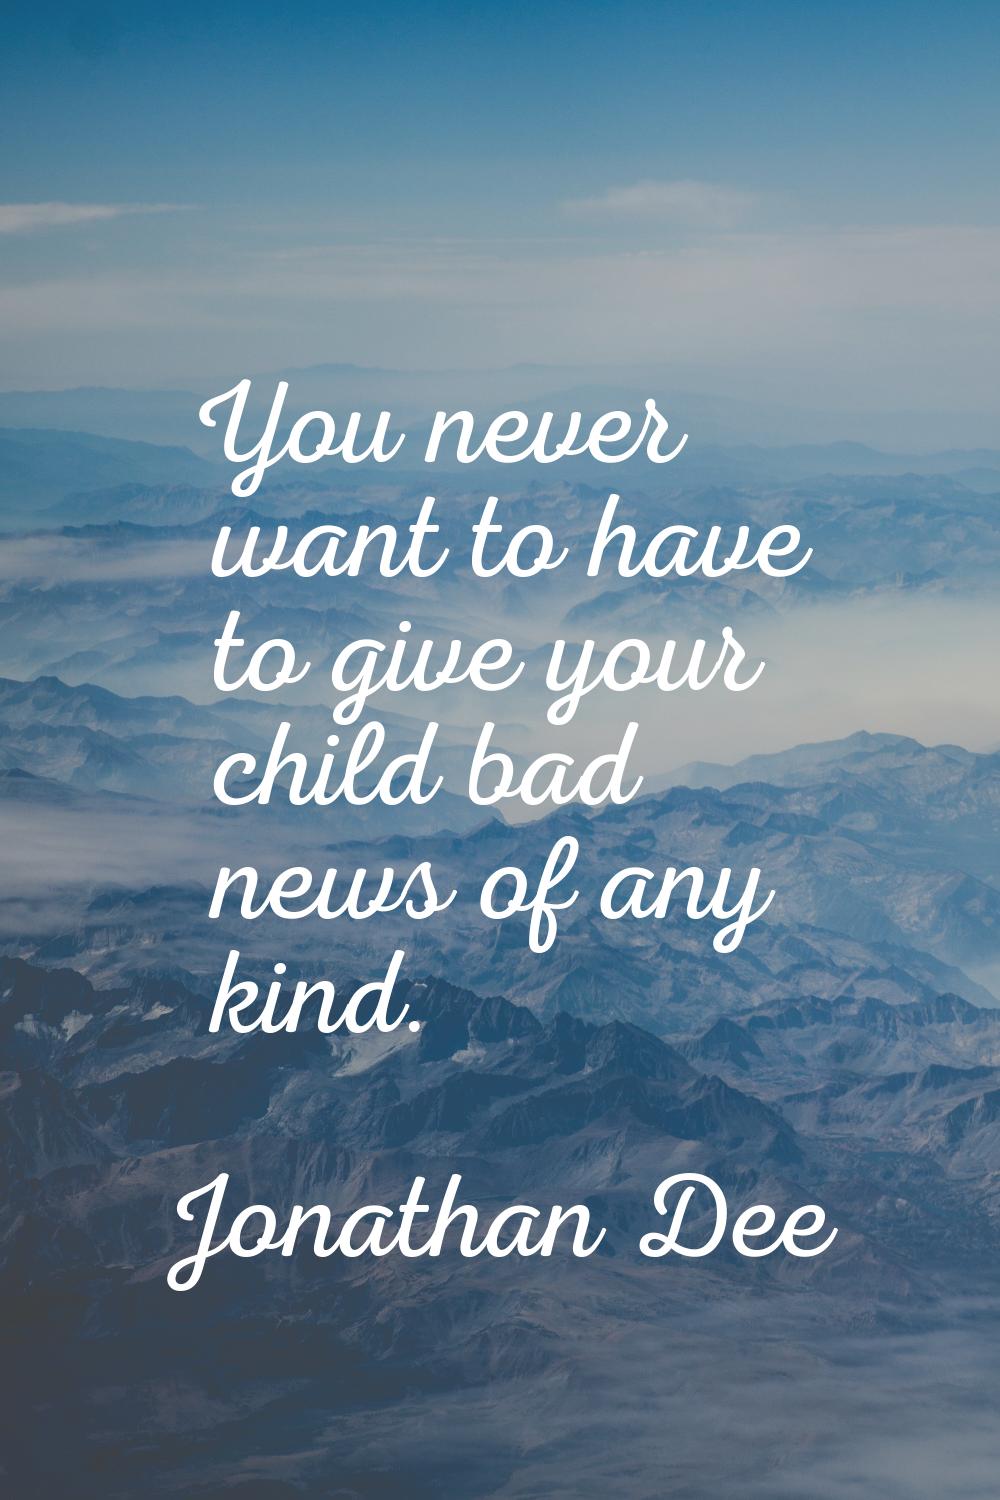 You never want to have to give your child bad news of any kind.